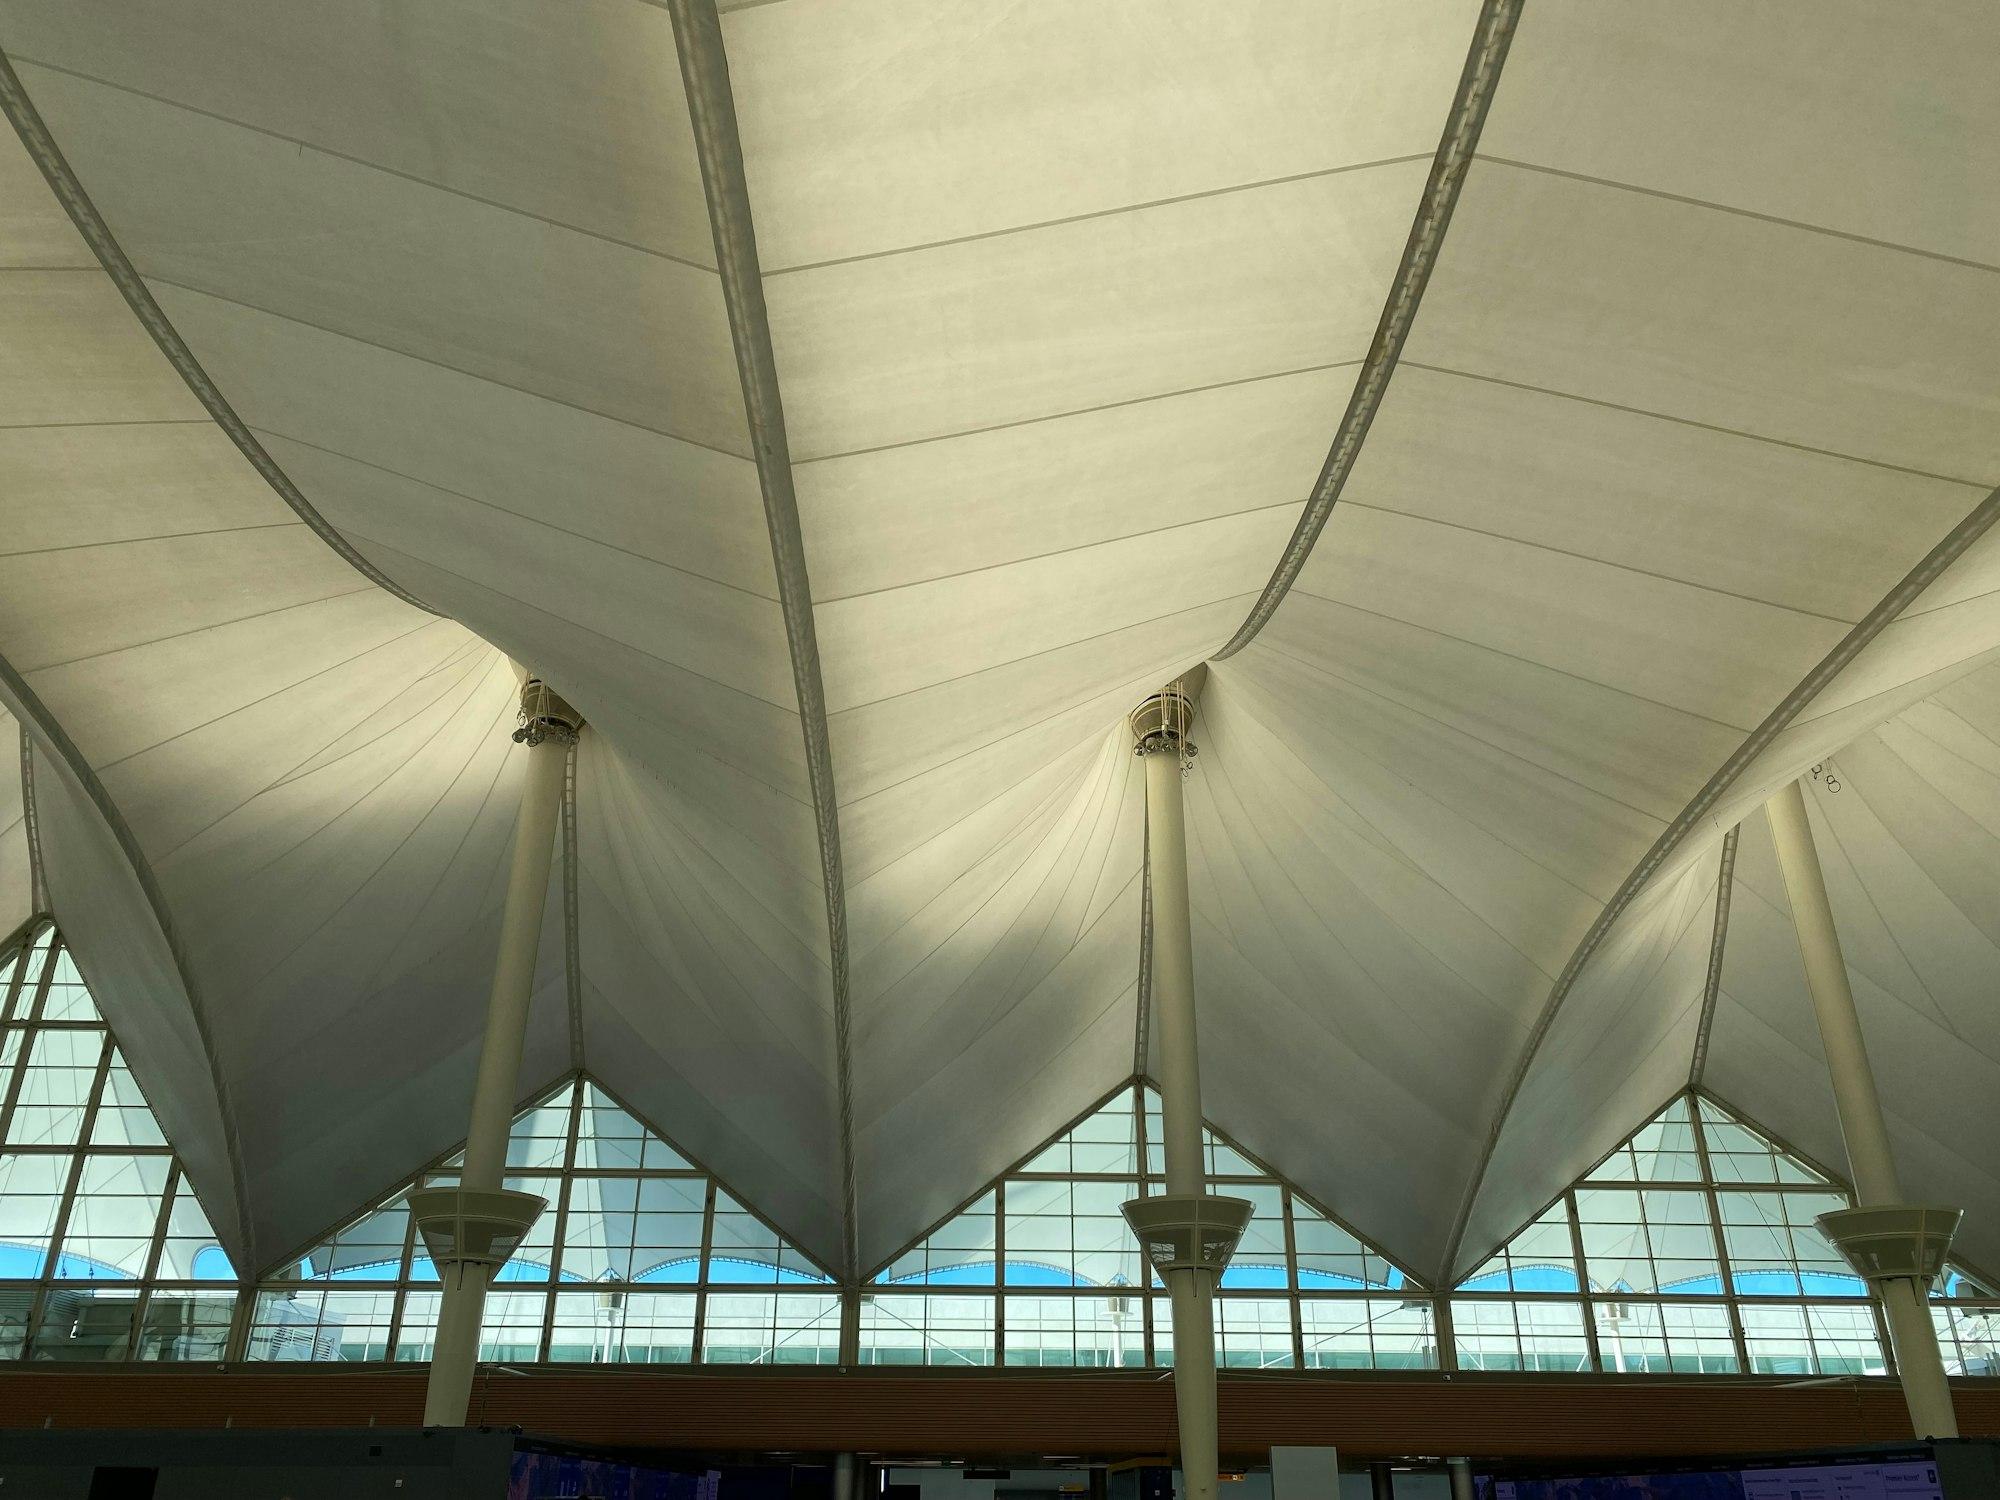 The peaked fabric roof of the Denver airport